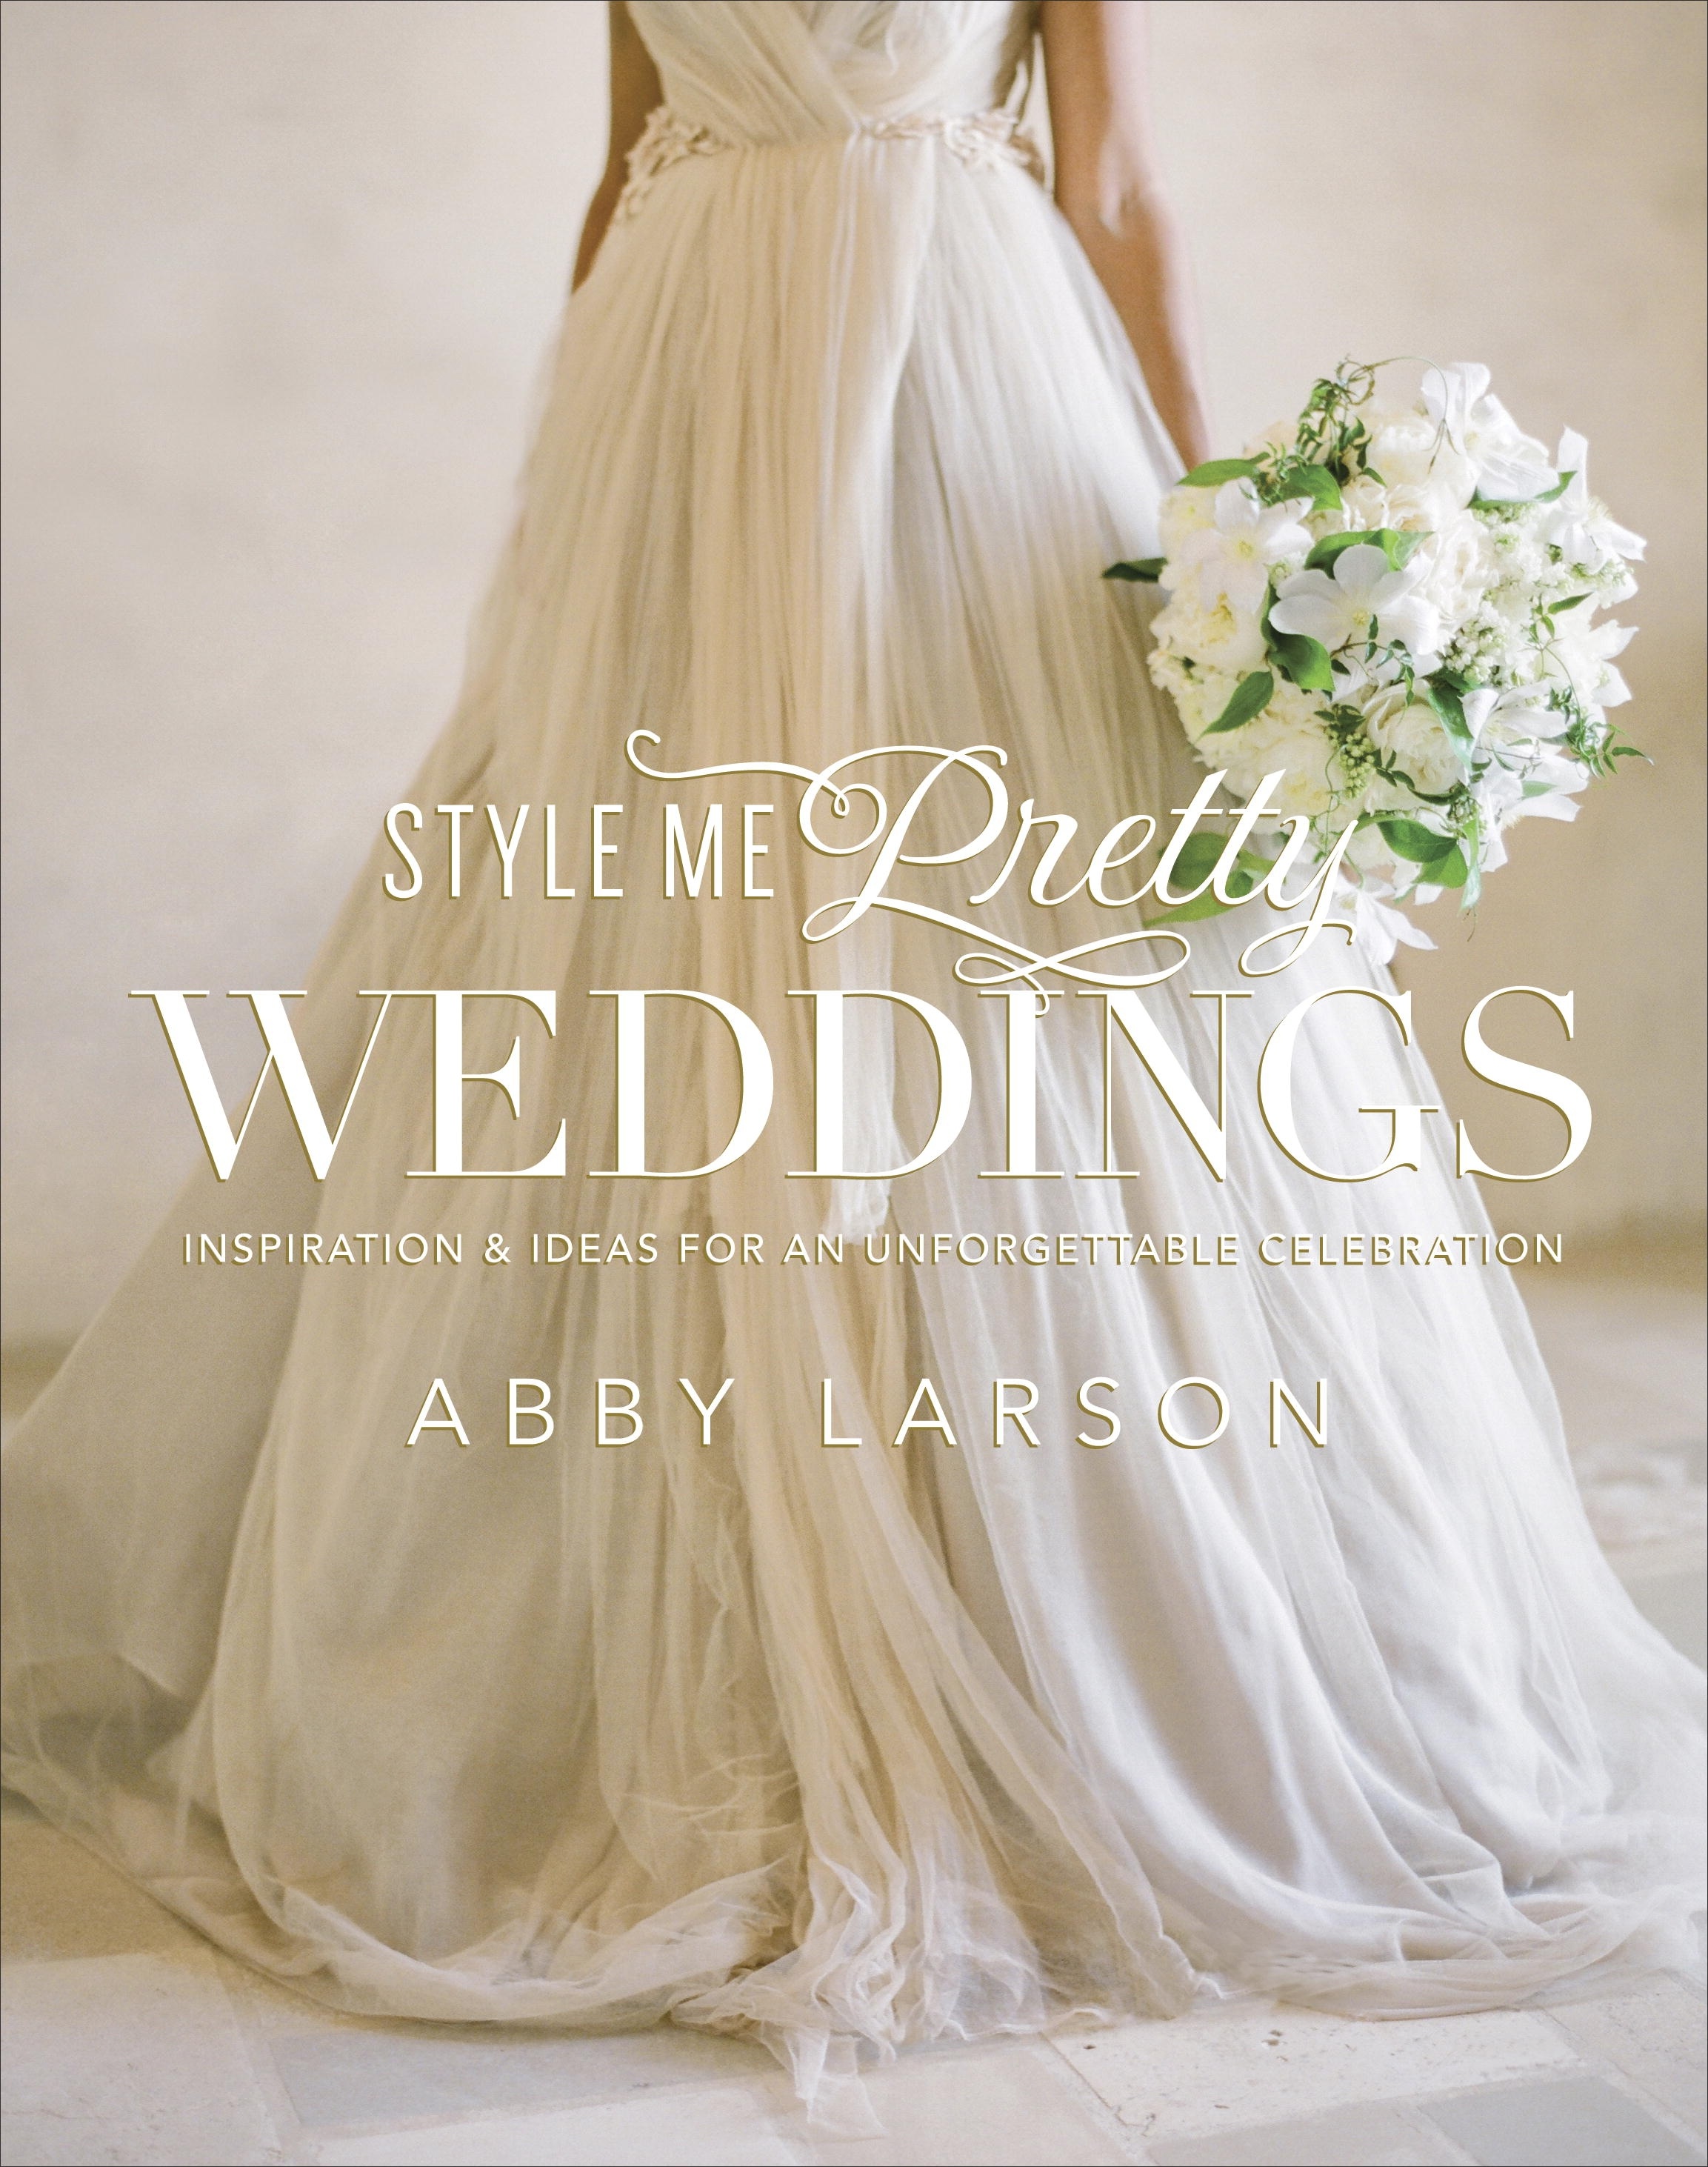 Book About Weddings